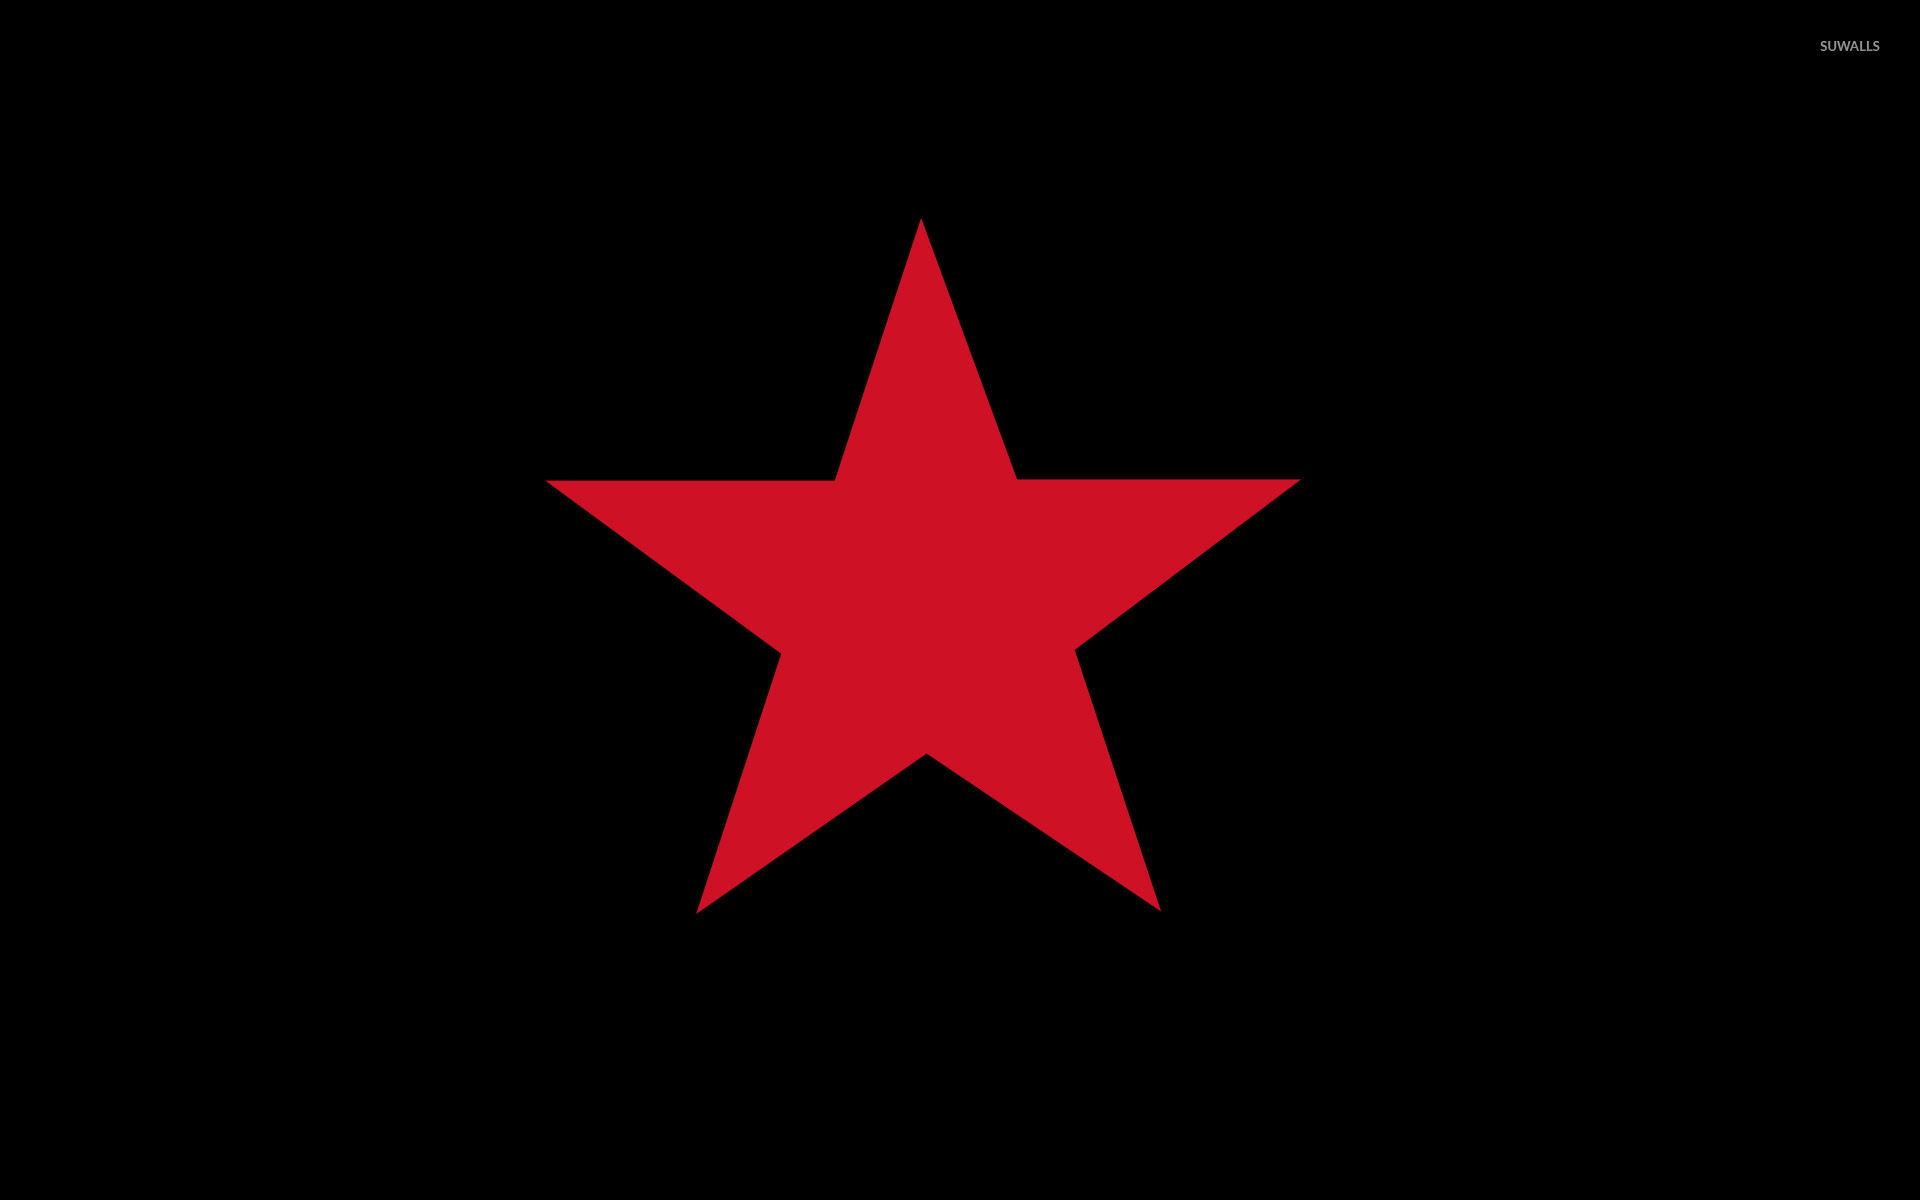 Red star Live wallpapers Android क लए APK डउनलड कर